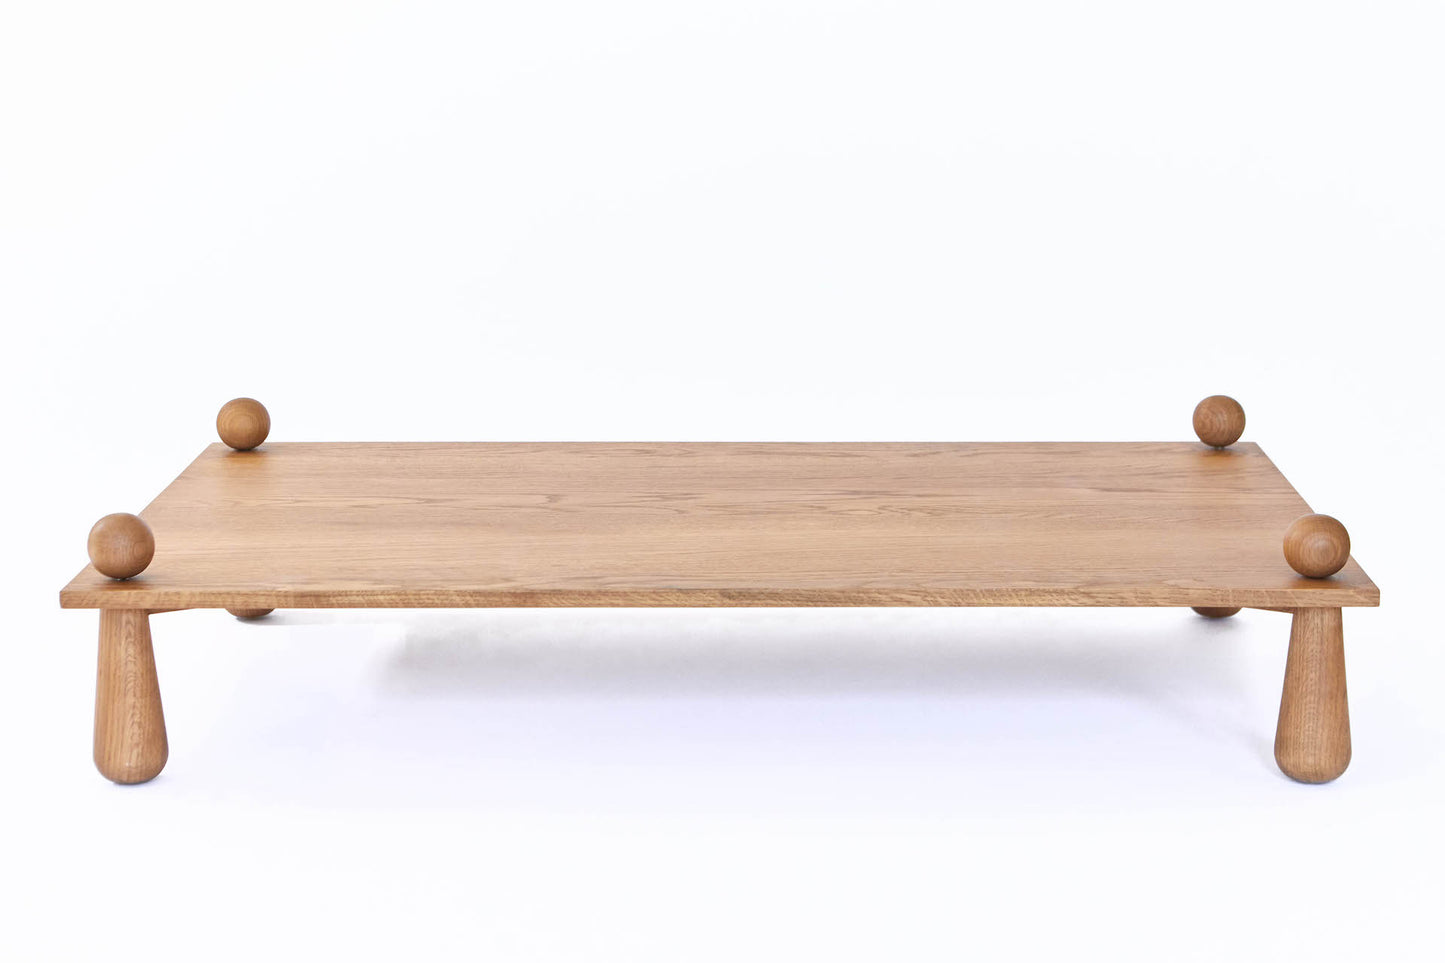 DOTT COFFEE TABLE - NATURAL